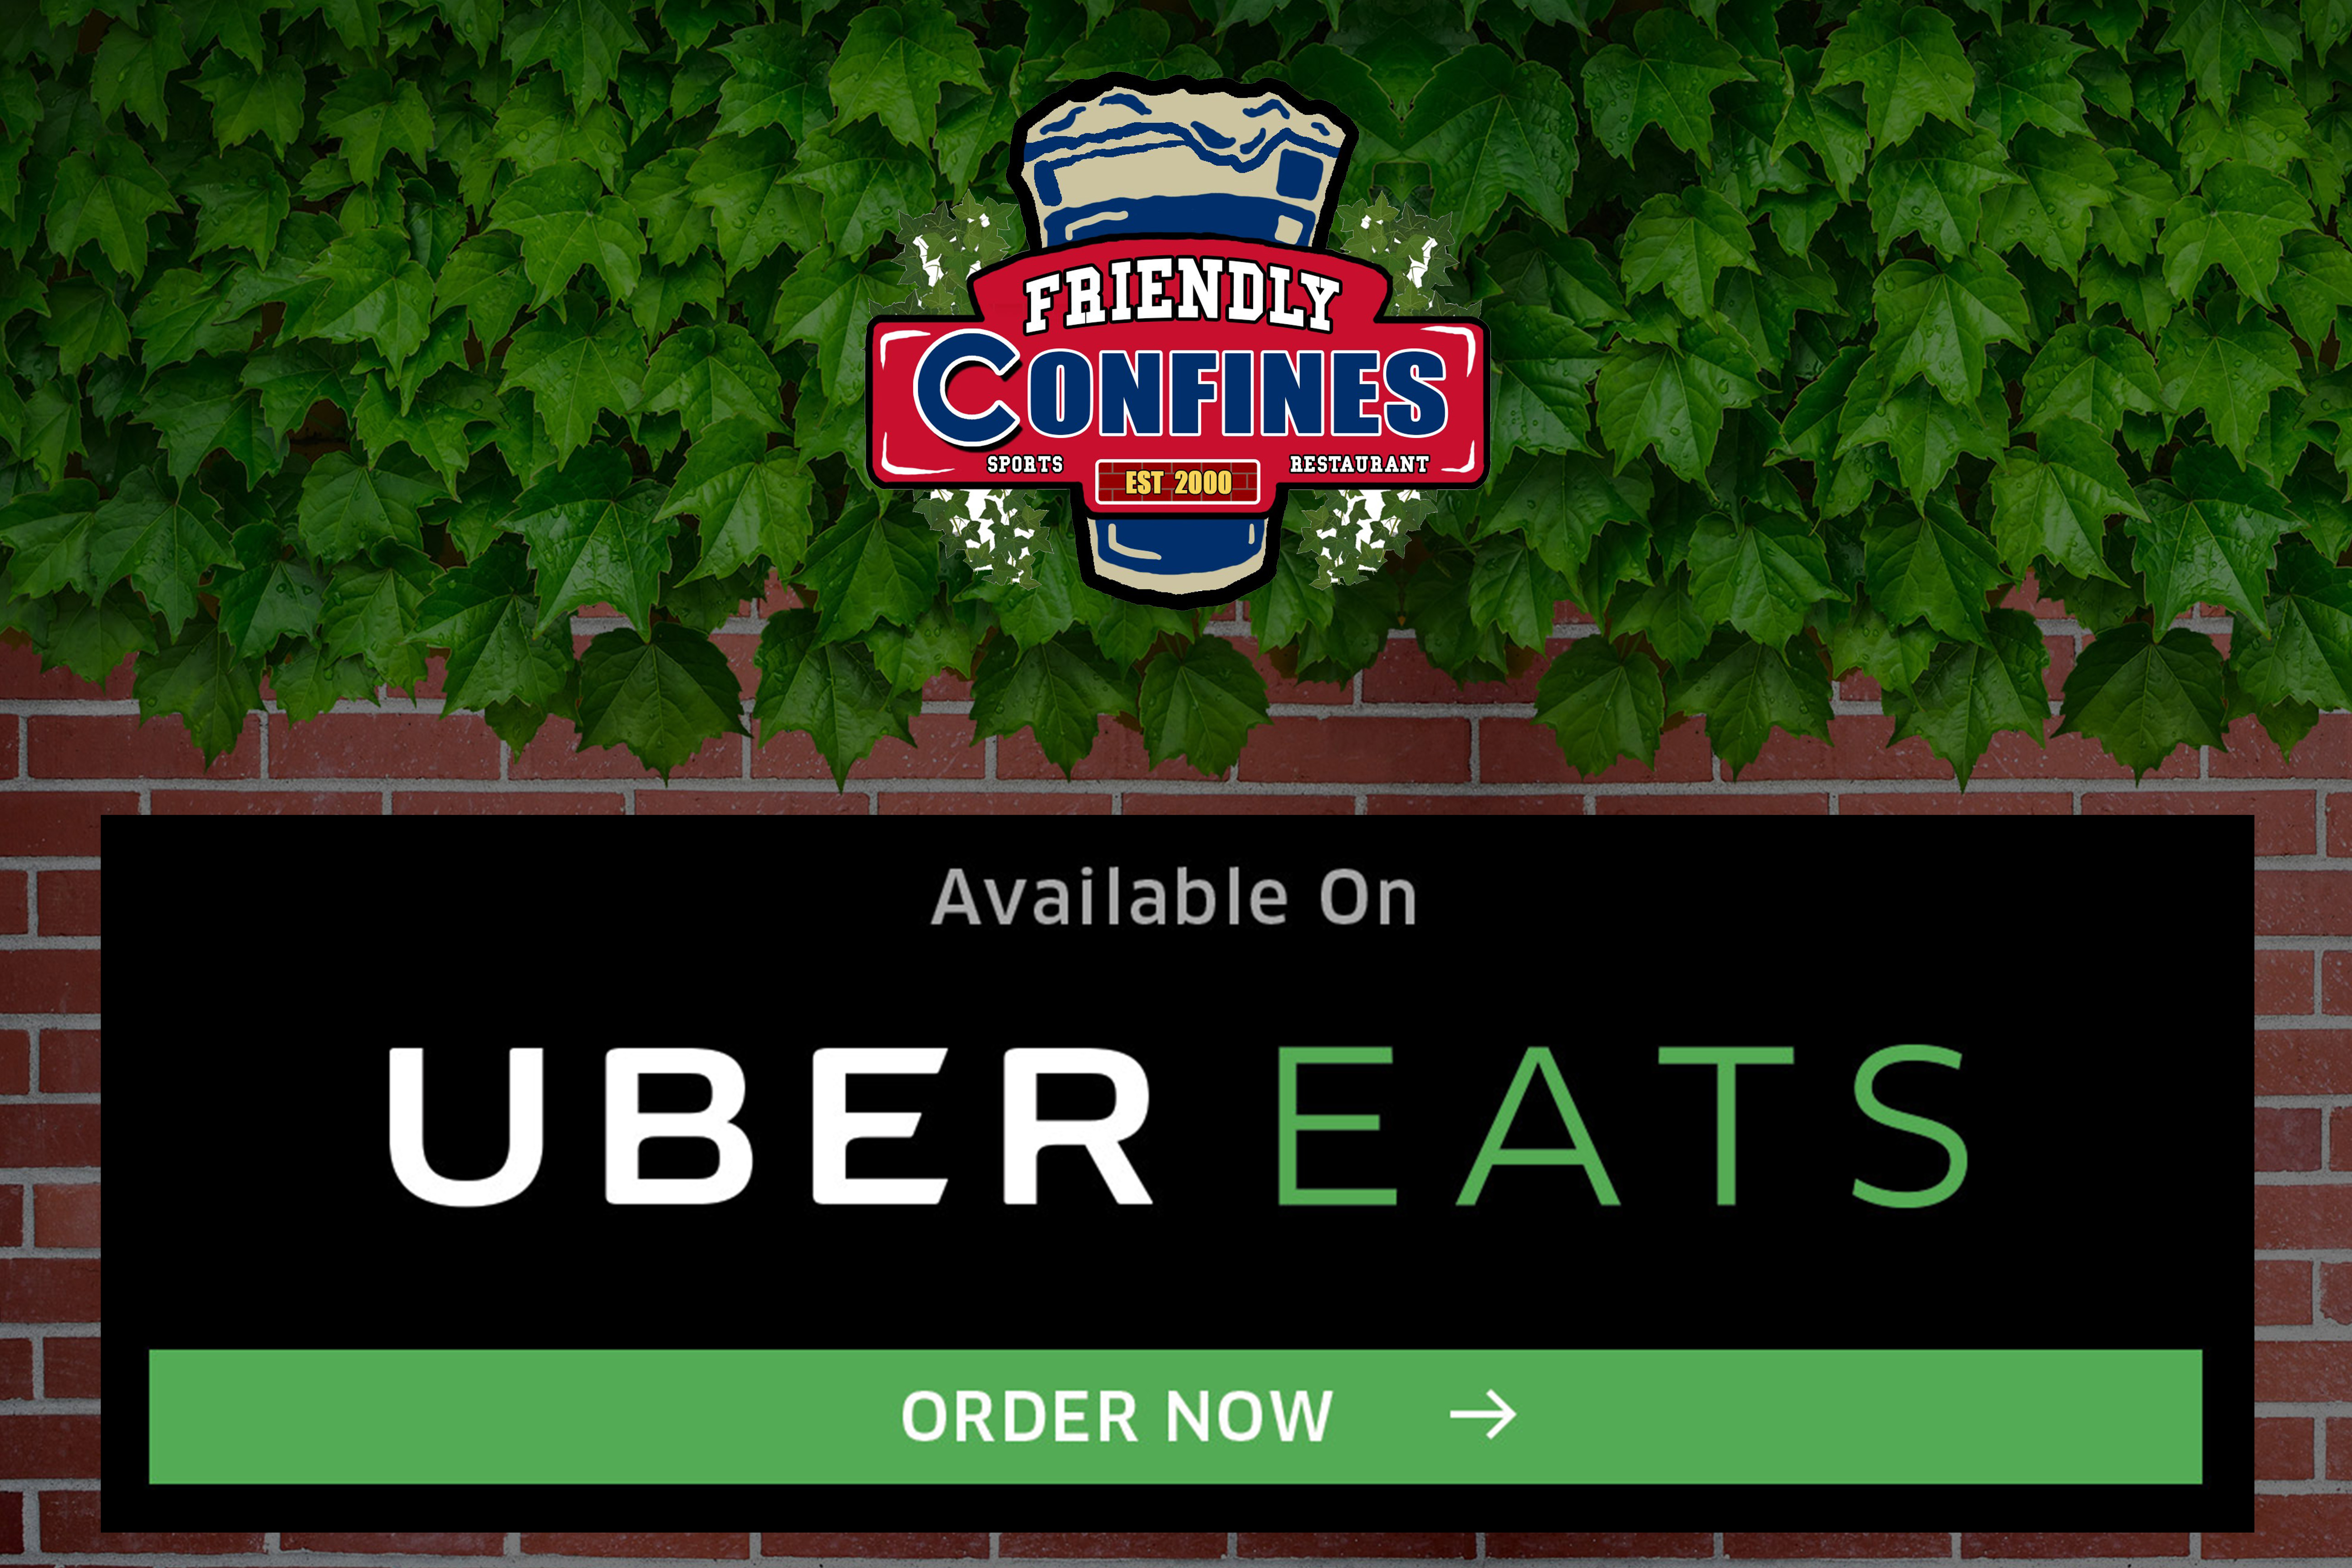 uber eats delivery from Friendly Confines